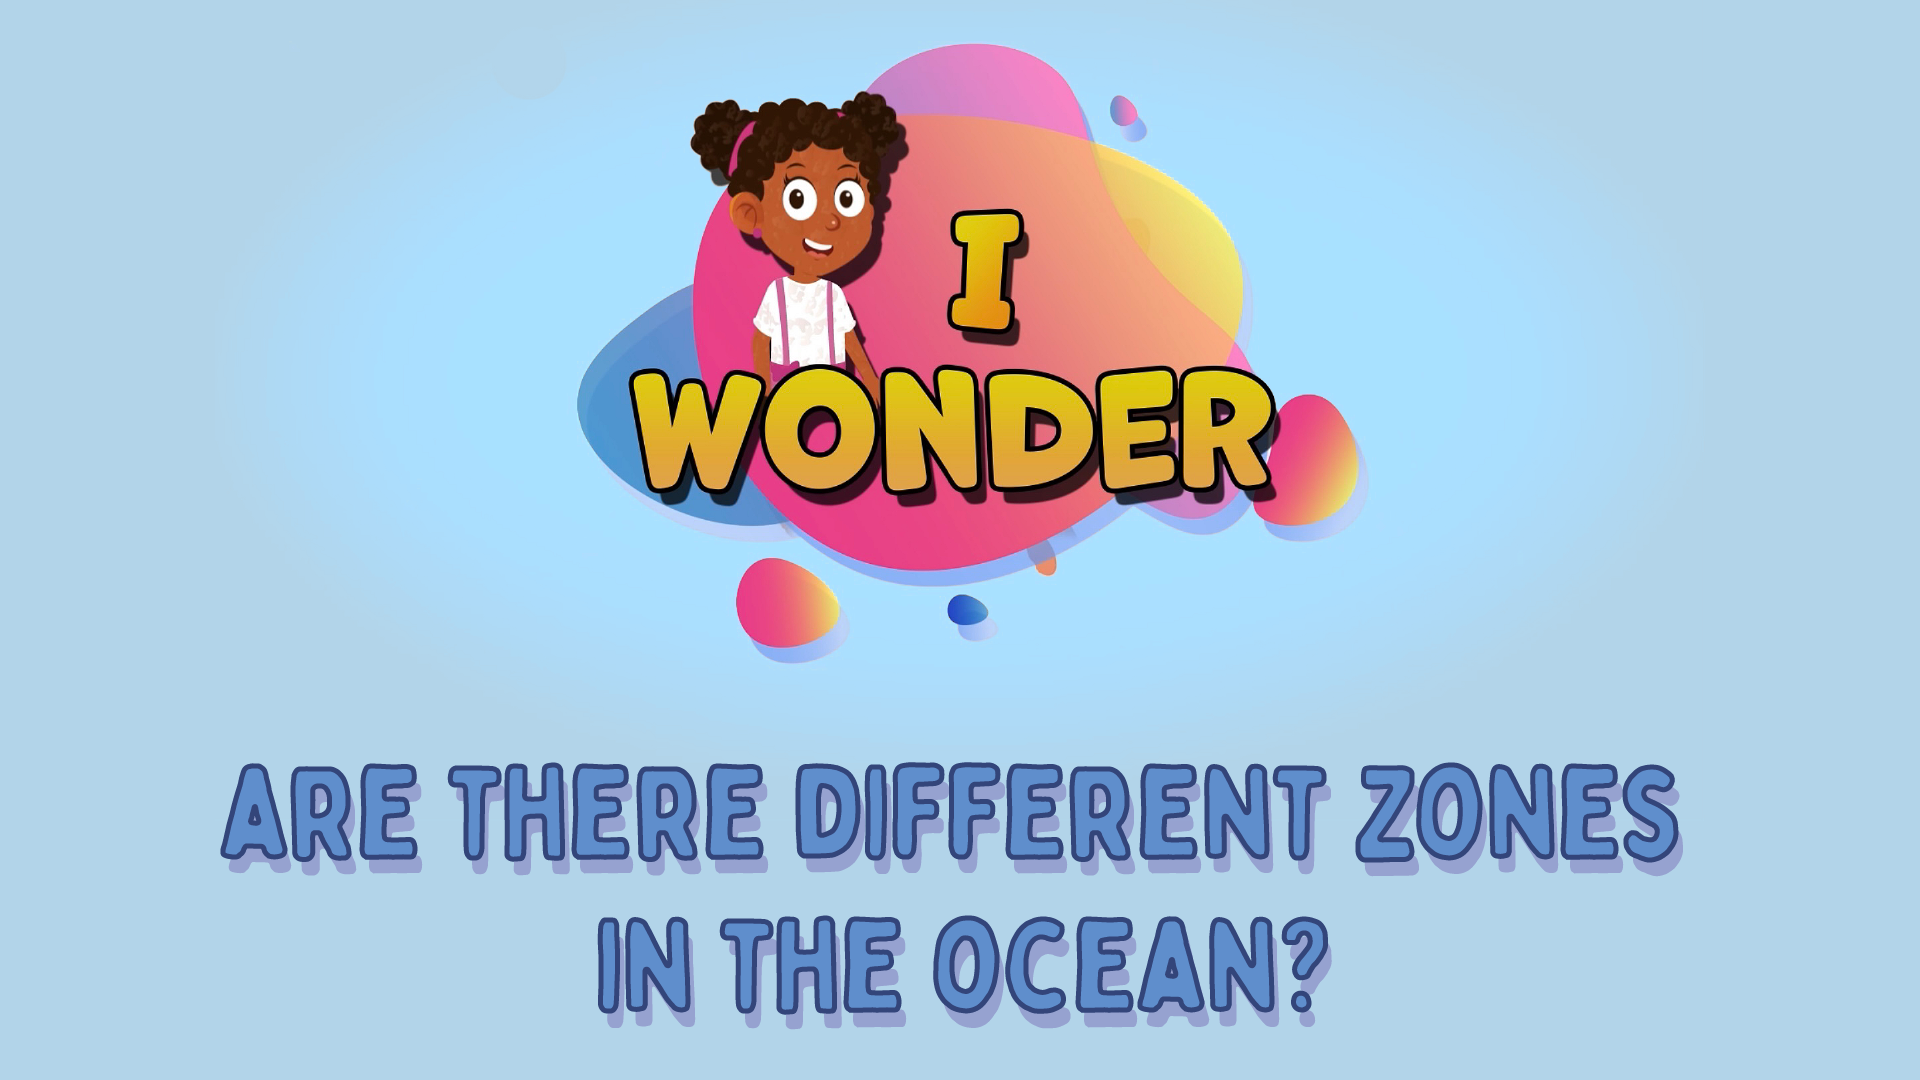 Are There Different Zones In The Ocean?